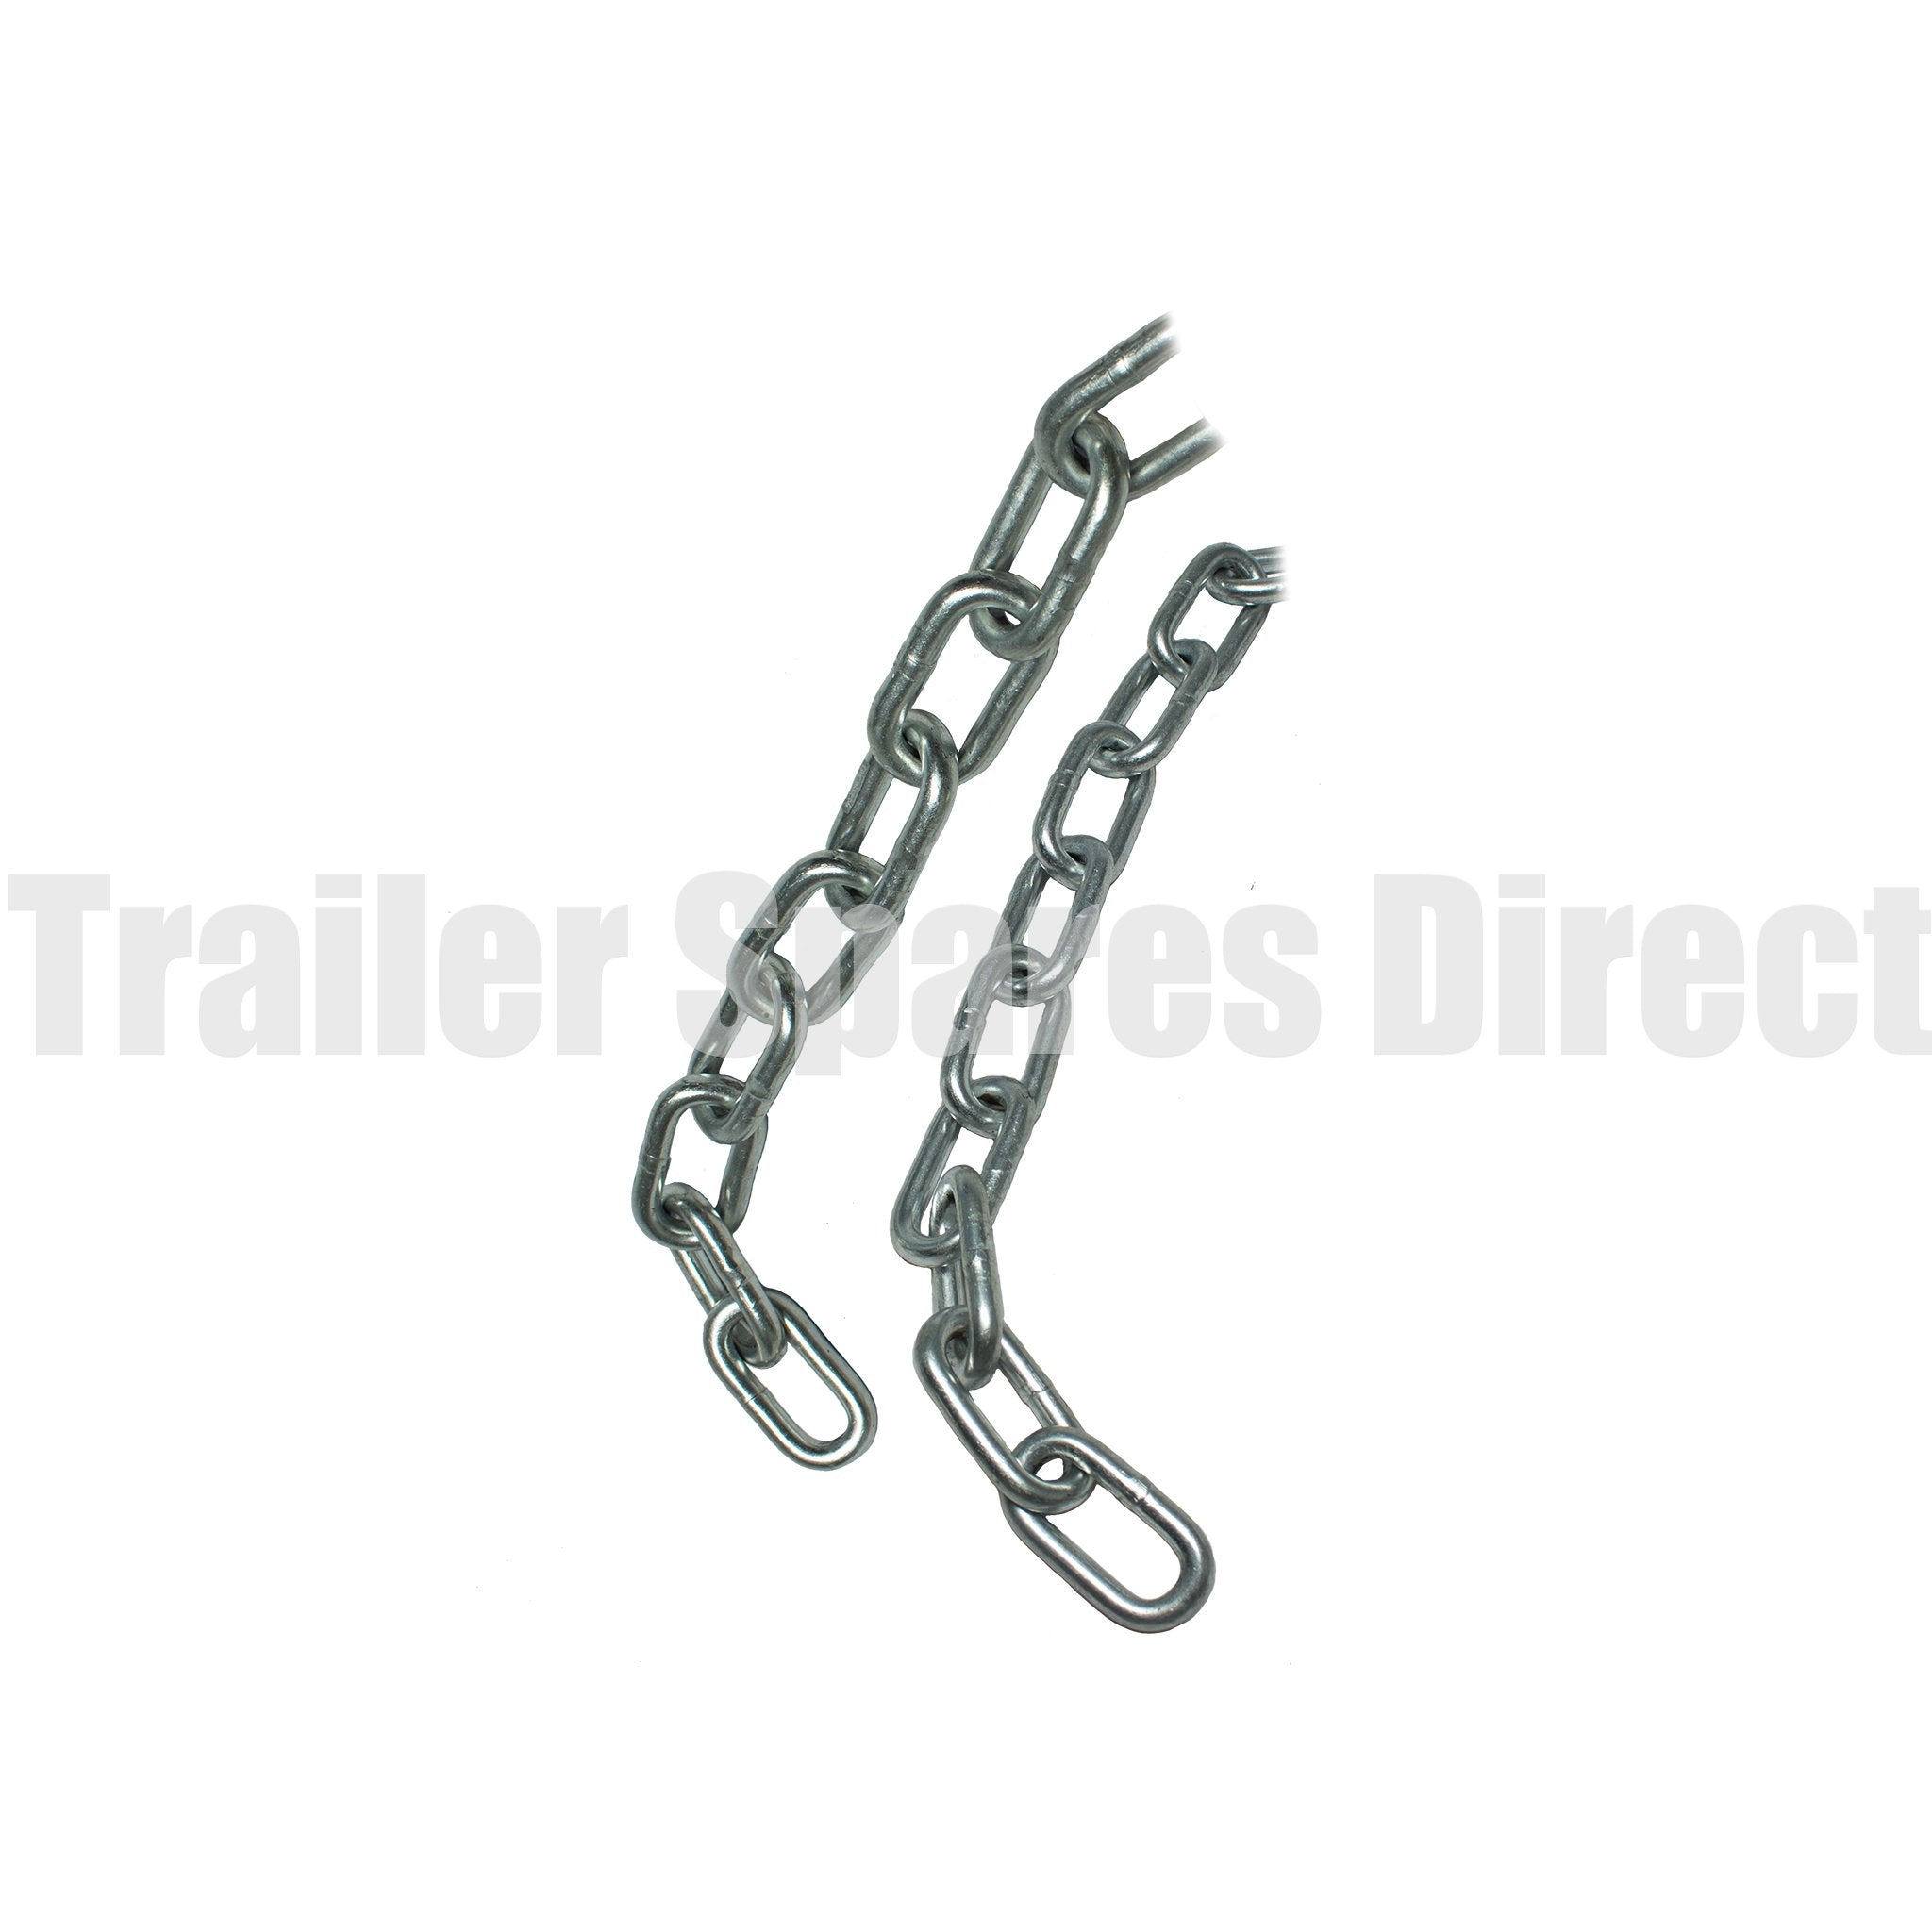 10mm and 13mm trailer safety chain rated